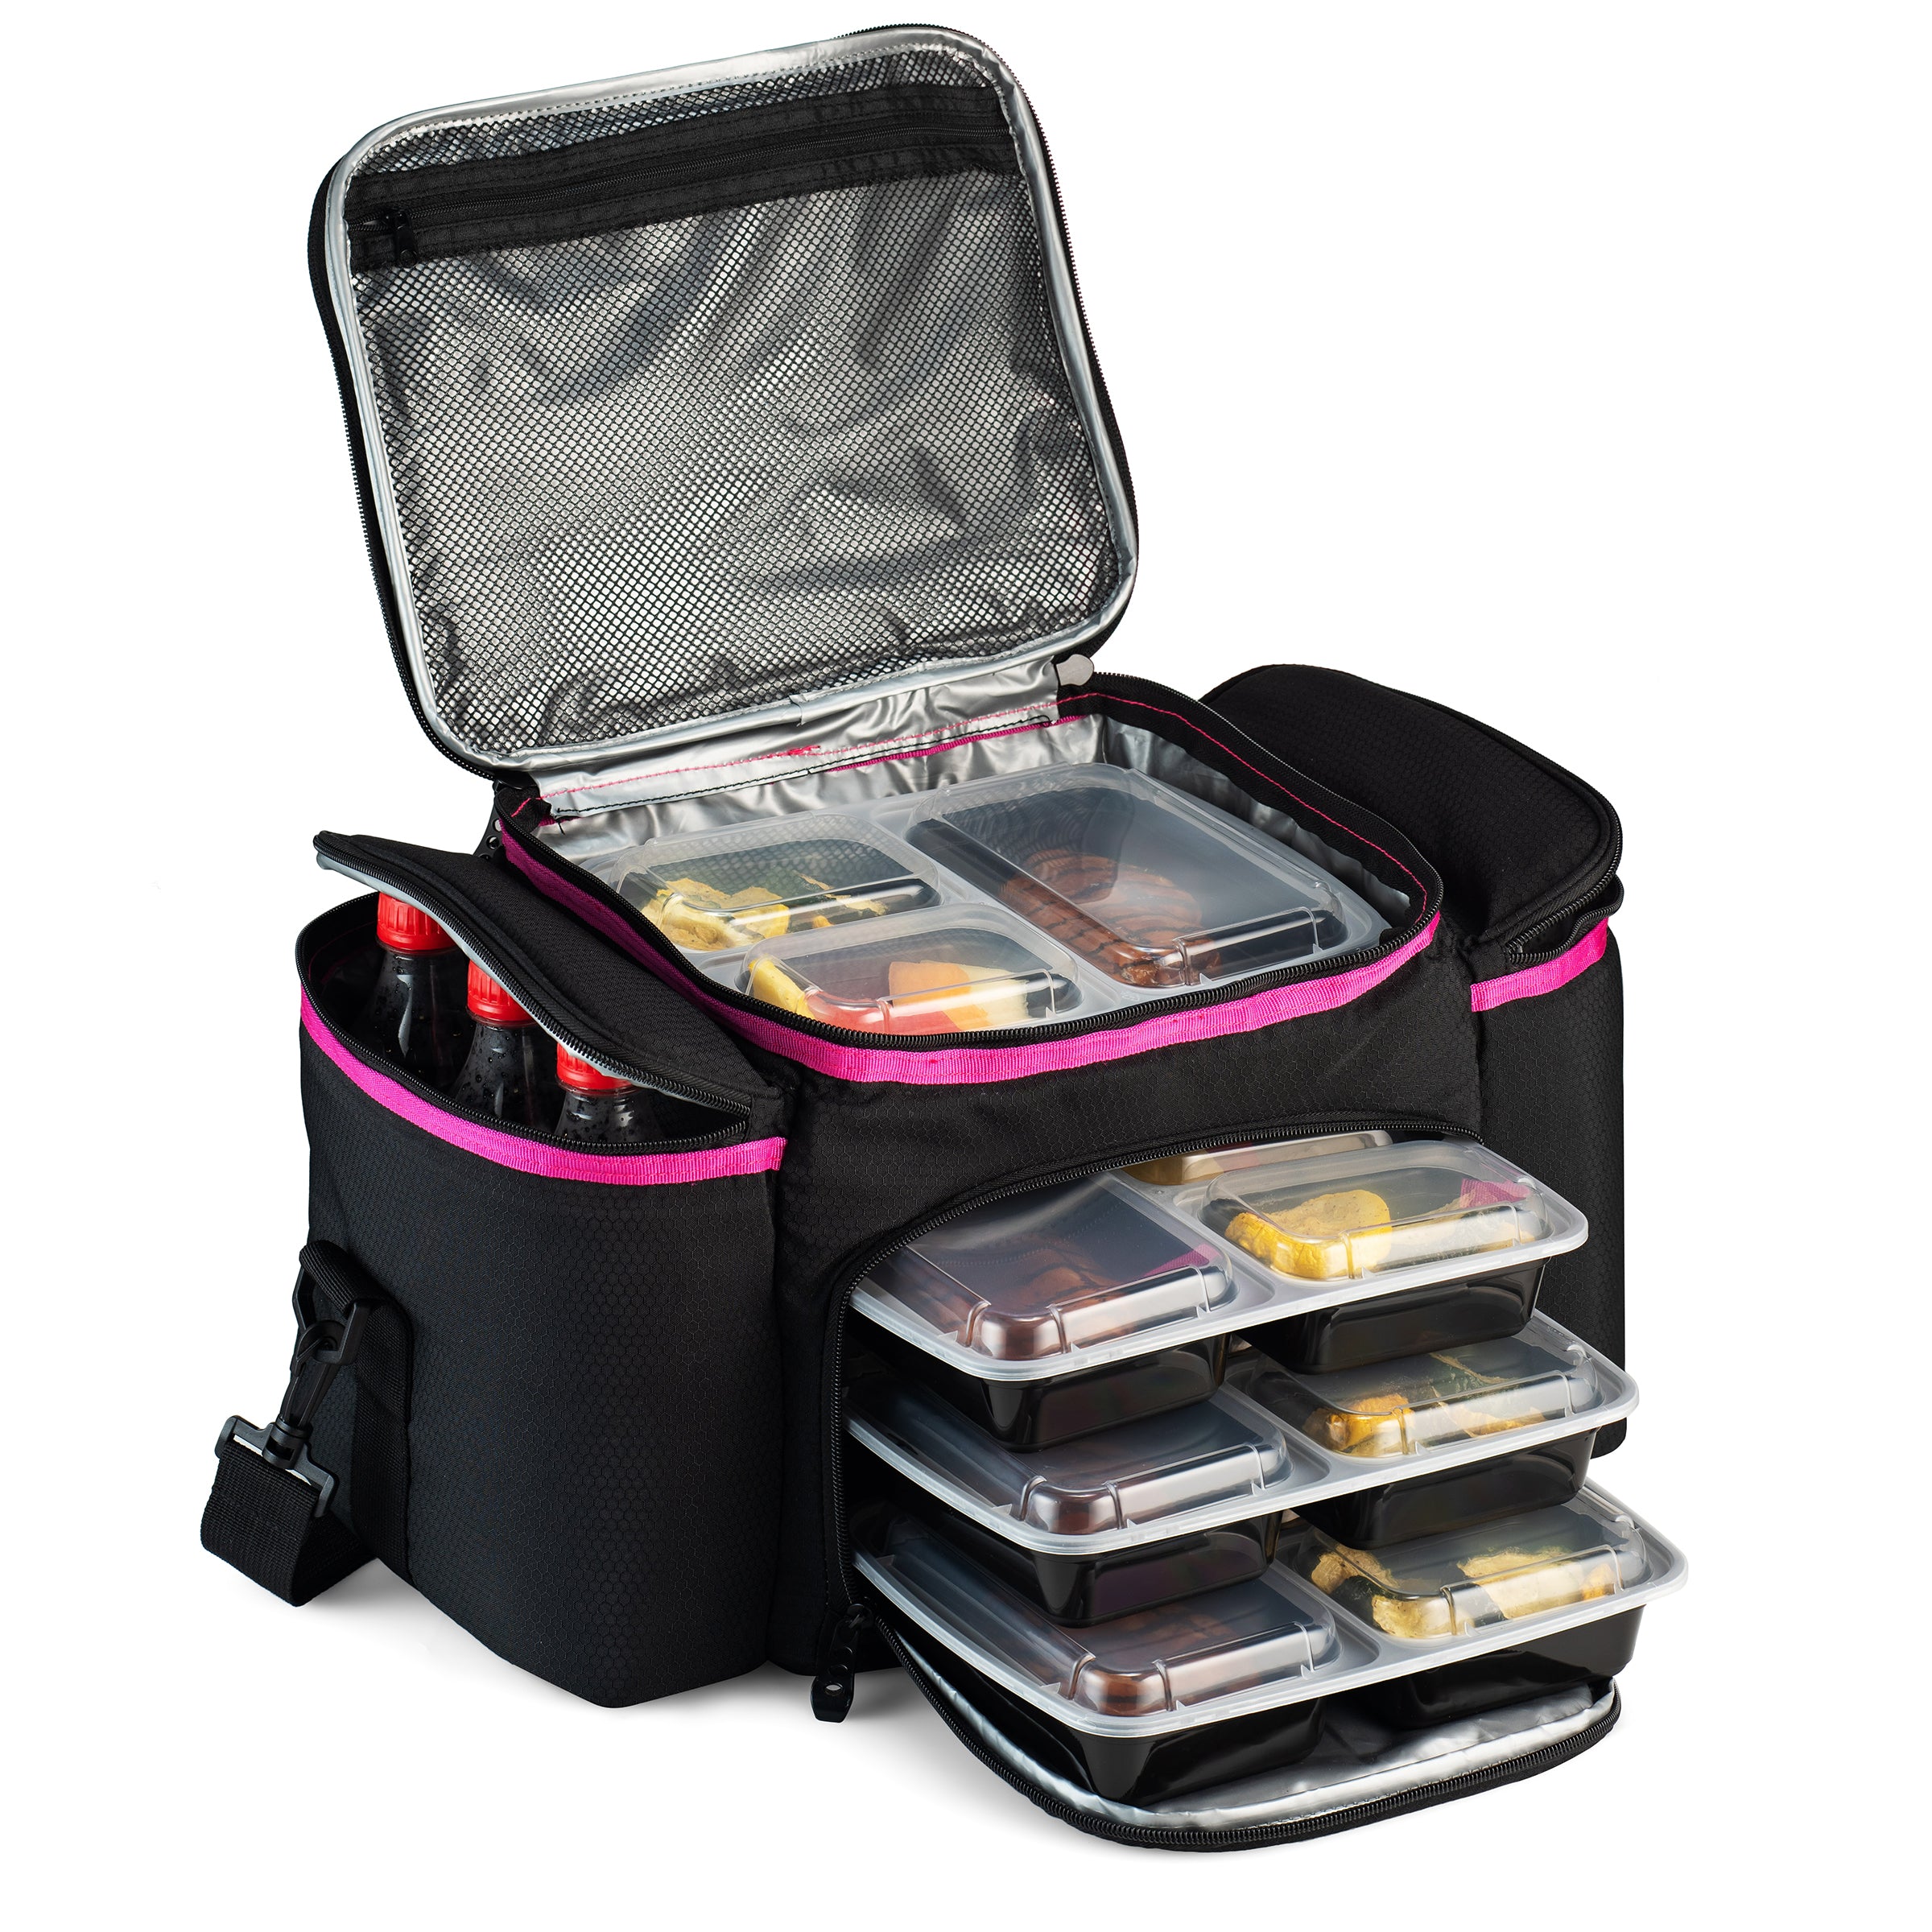 Lunch cooler Box bag Insulated Compartment Leak proof good for travel,  work, fishing, all kind of picnic ET. 